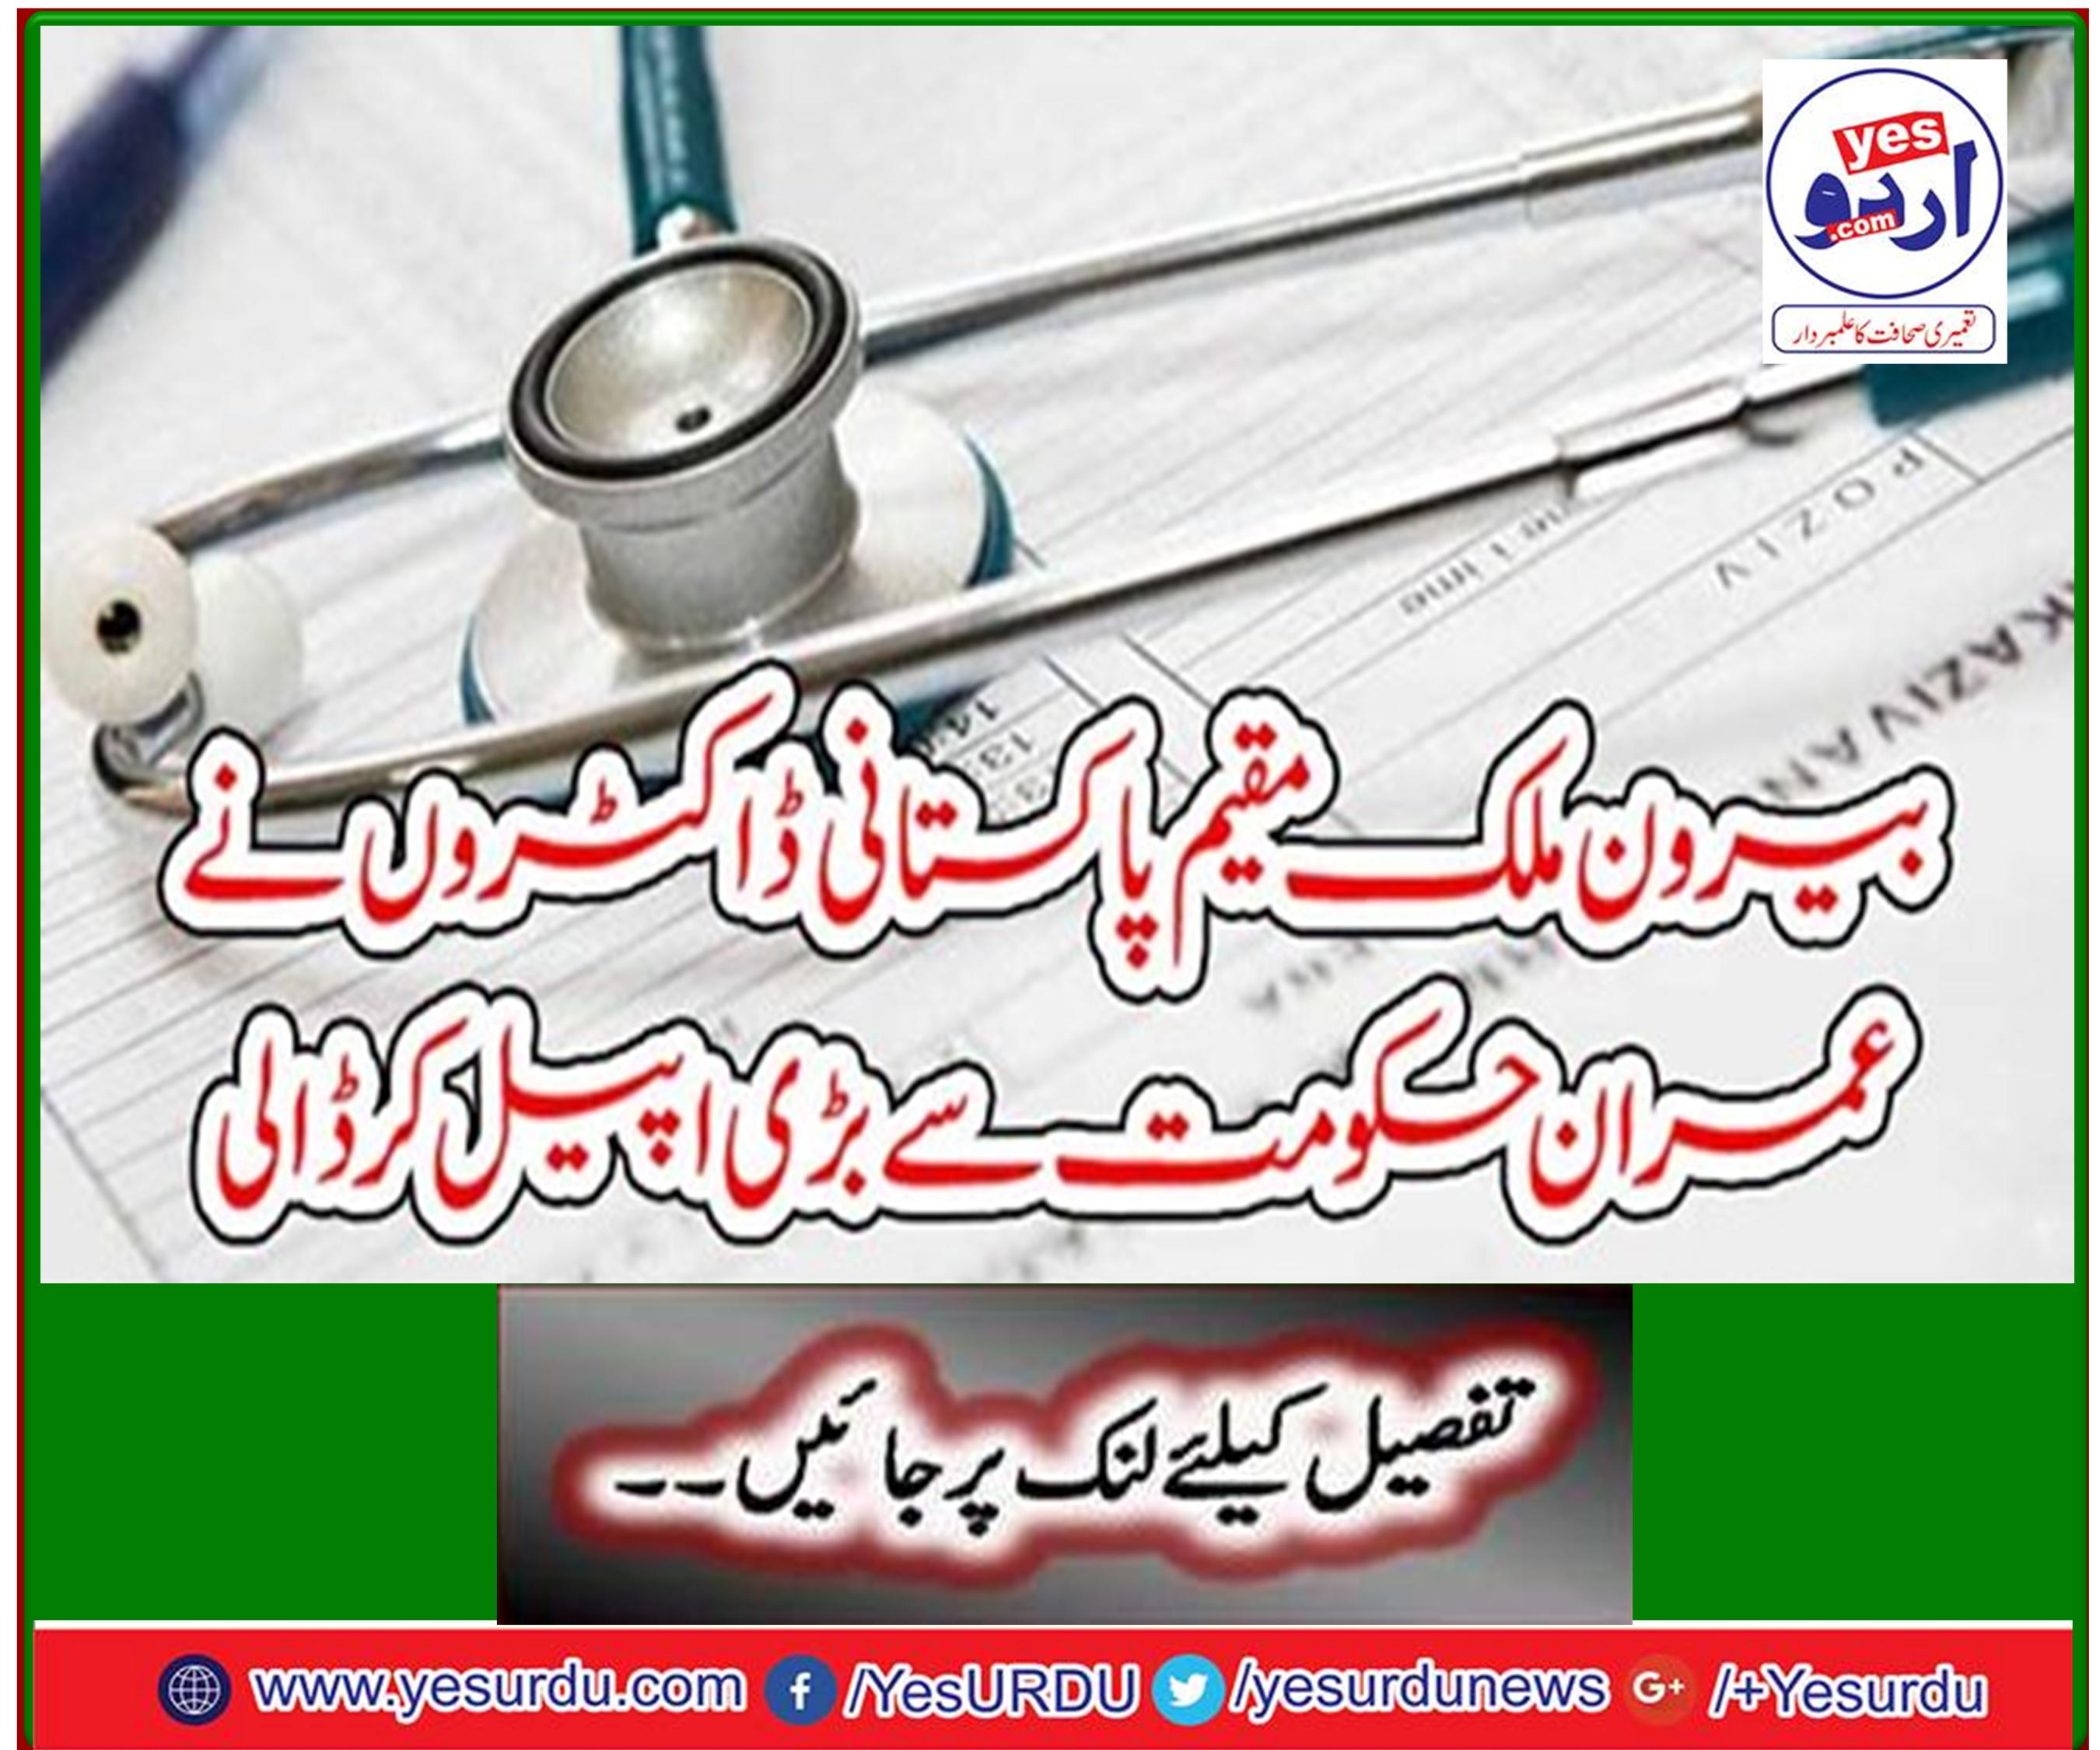 Overseas Pakistani doctors have appealed to the Imran government